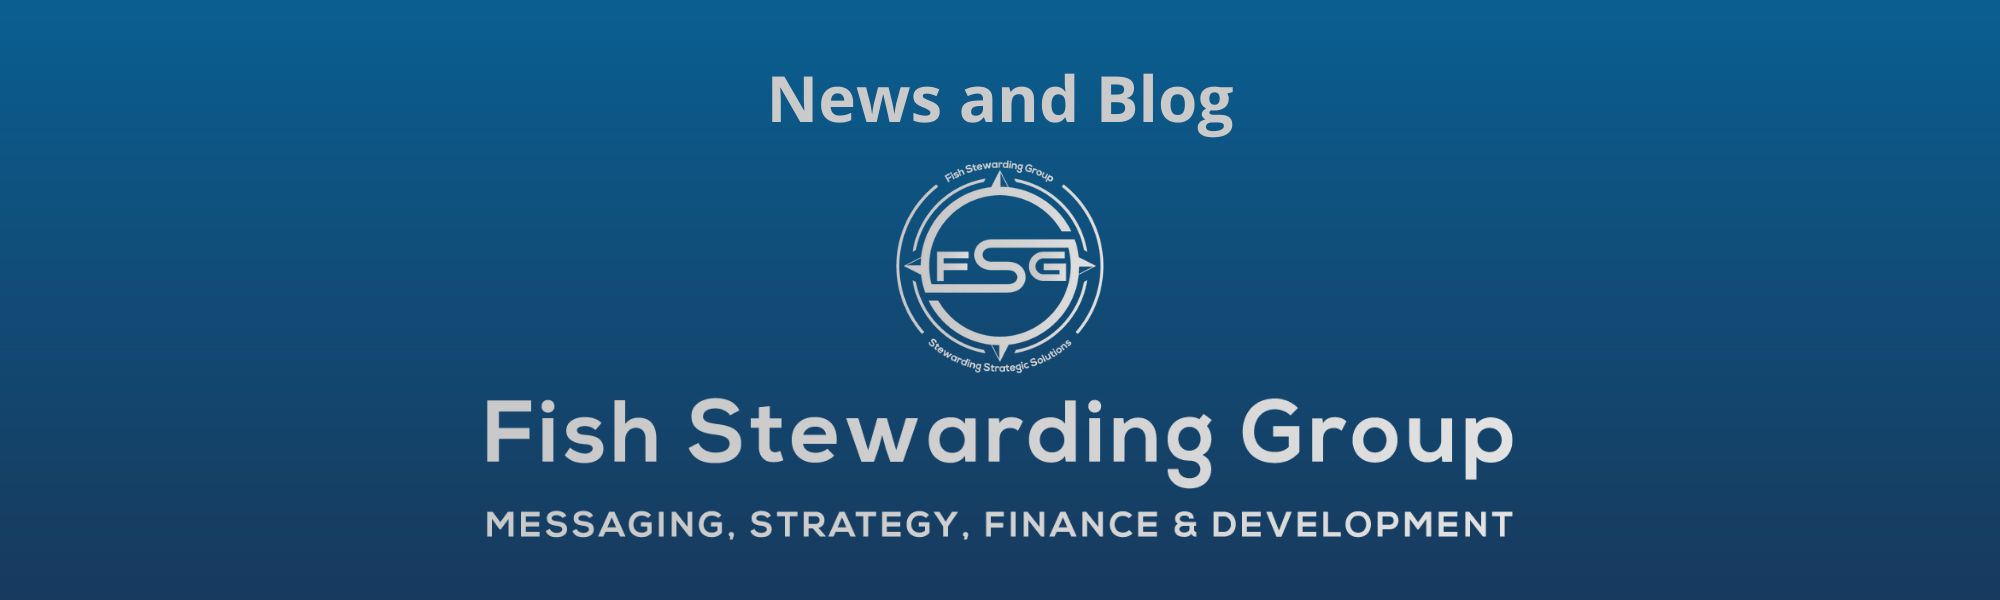 A thin rectangular Footer graphic for the News and Blog page. The background is a blue gradient color that goes from a dark blue on the bottom to a lighter blue on top. The text in gray on top reads News and Blog. The text in gray on the bottom center reads: Fish Stewarding Group and beneath that, the text reads Messaging, Strategy, Finance and Development. In the center above the text is the FSG logo in gray. The logo has the letters FSG in the middle with a circle with four pointed arrows facing north, south, east and west with the S connected to that circle. Four rounded lines make the next circle of the circle and the last layer is a thin circle with the text on the Bottom that reads Stewarding Strategist Solutions and on top, the text reads Fish Stewarding Group.